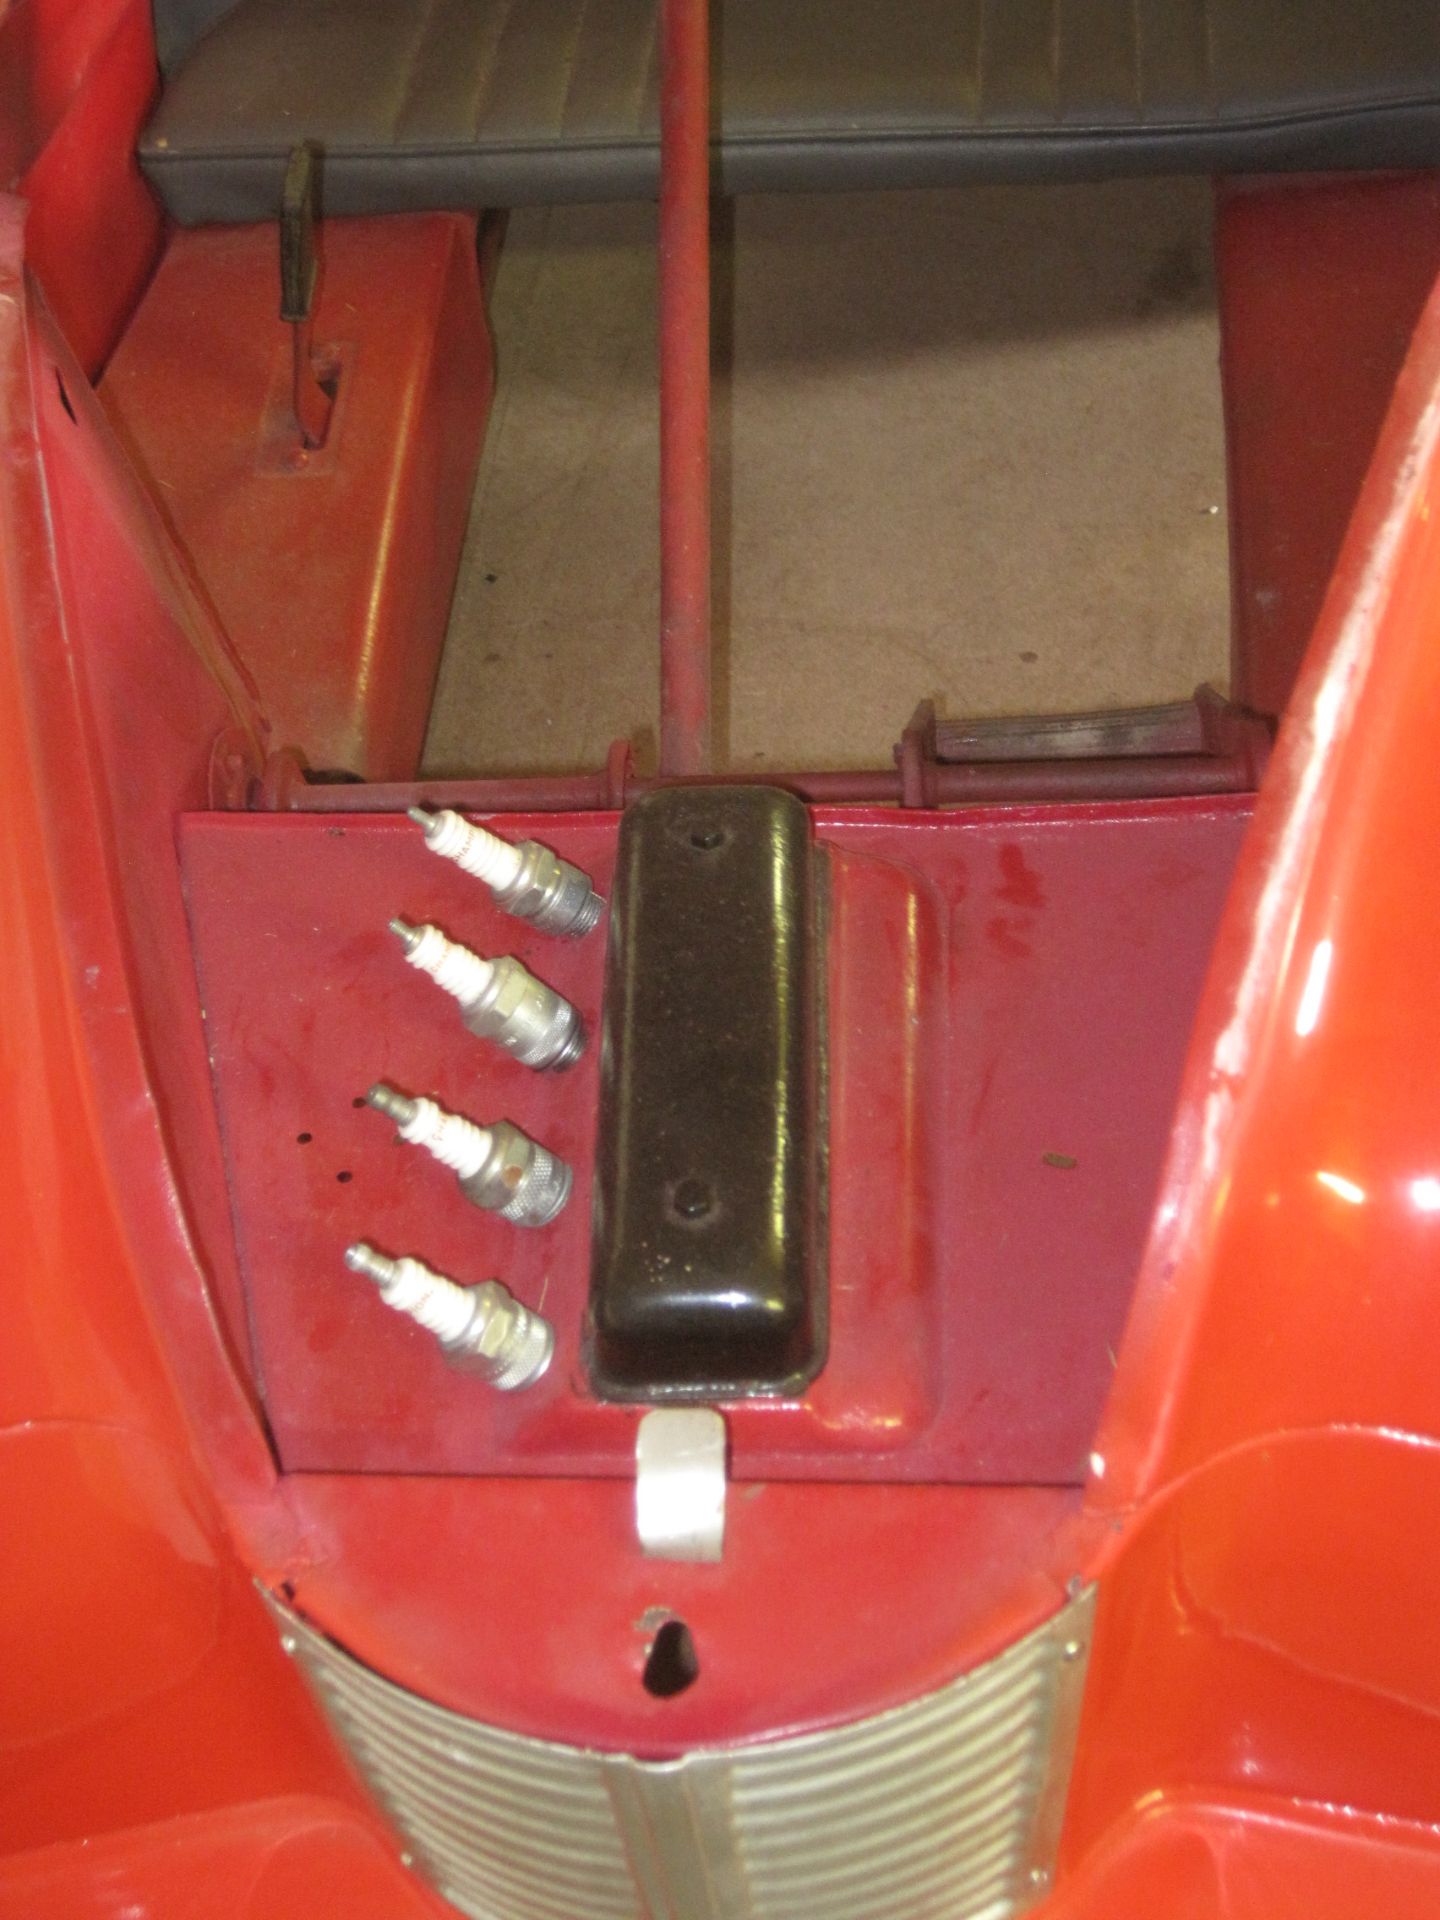 1948 Austin J40 pedal car, an older restoration from a private collection - Image 3 of 8